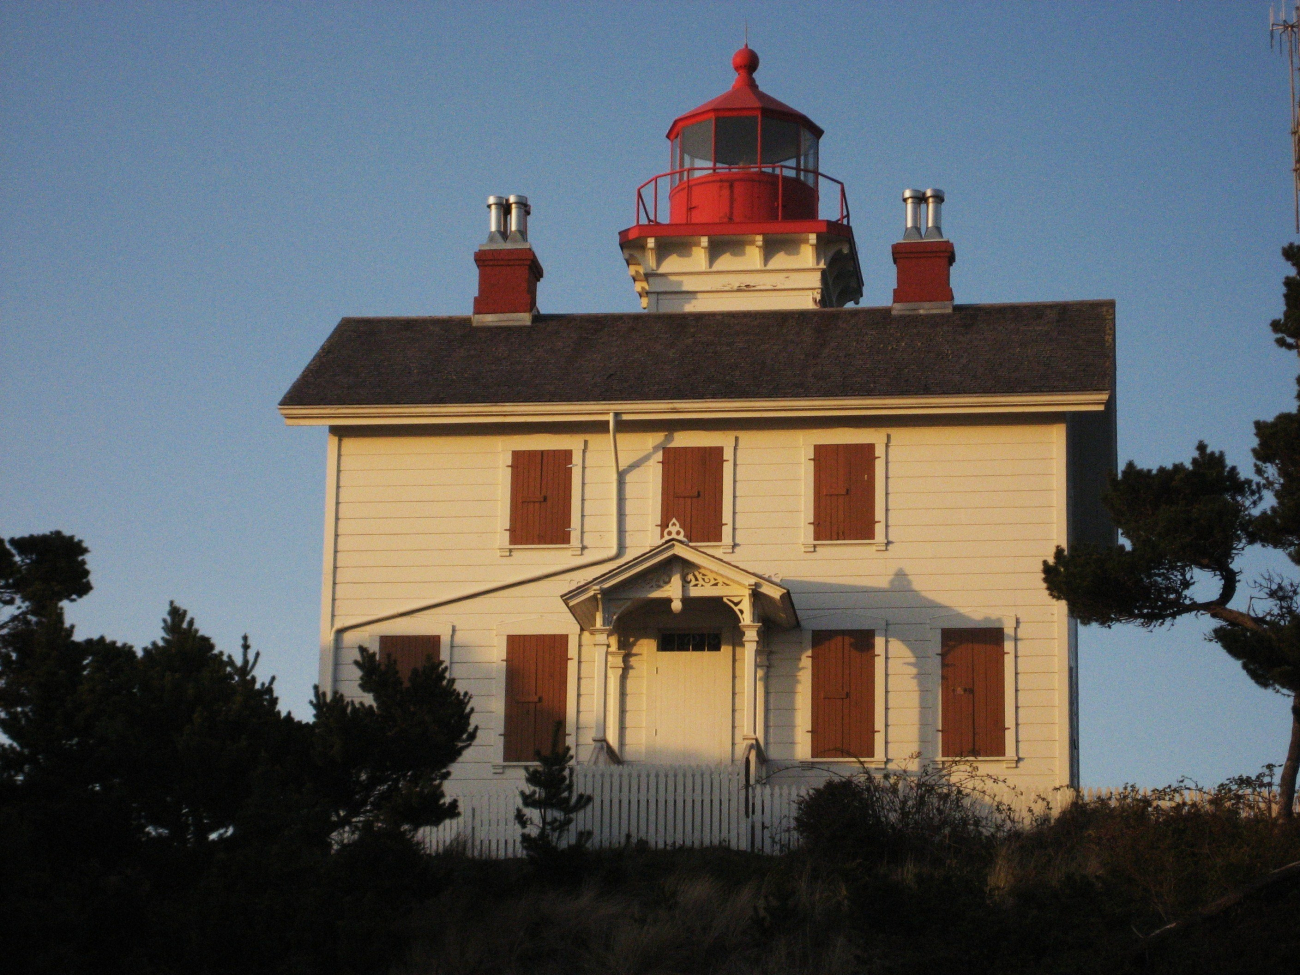 Yaquina Bay Lighthouse illuminated by the late afternoon sun